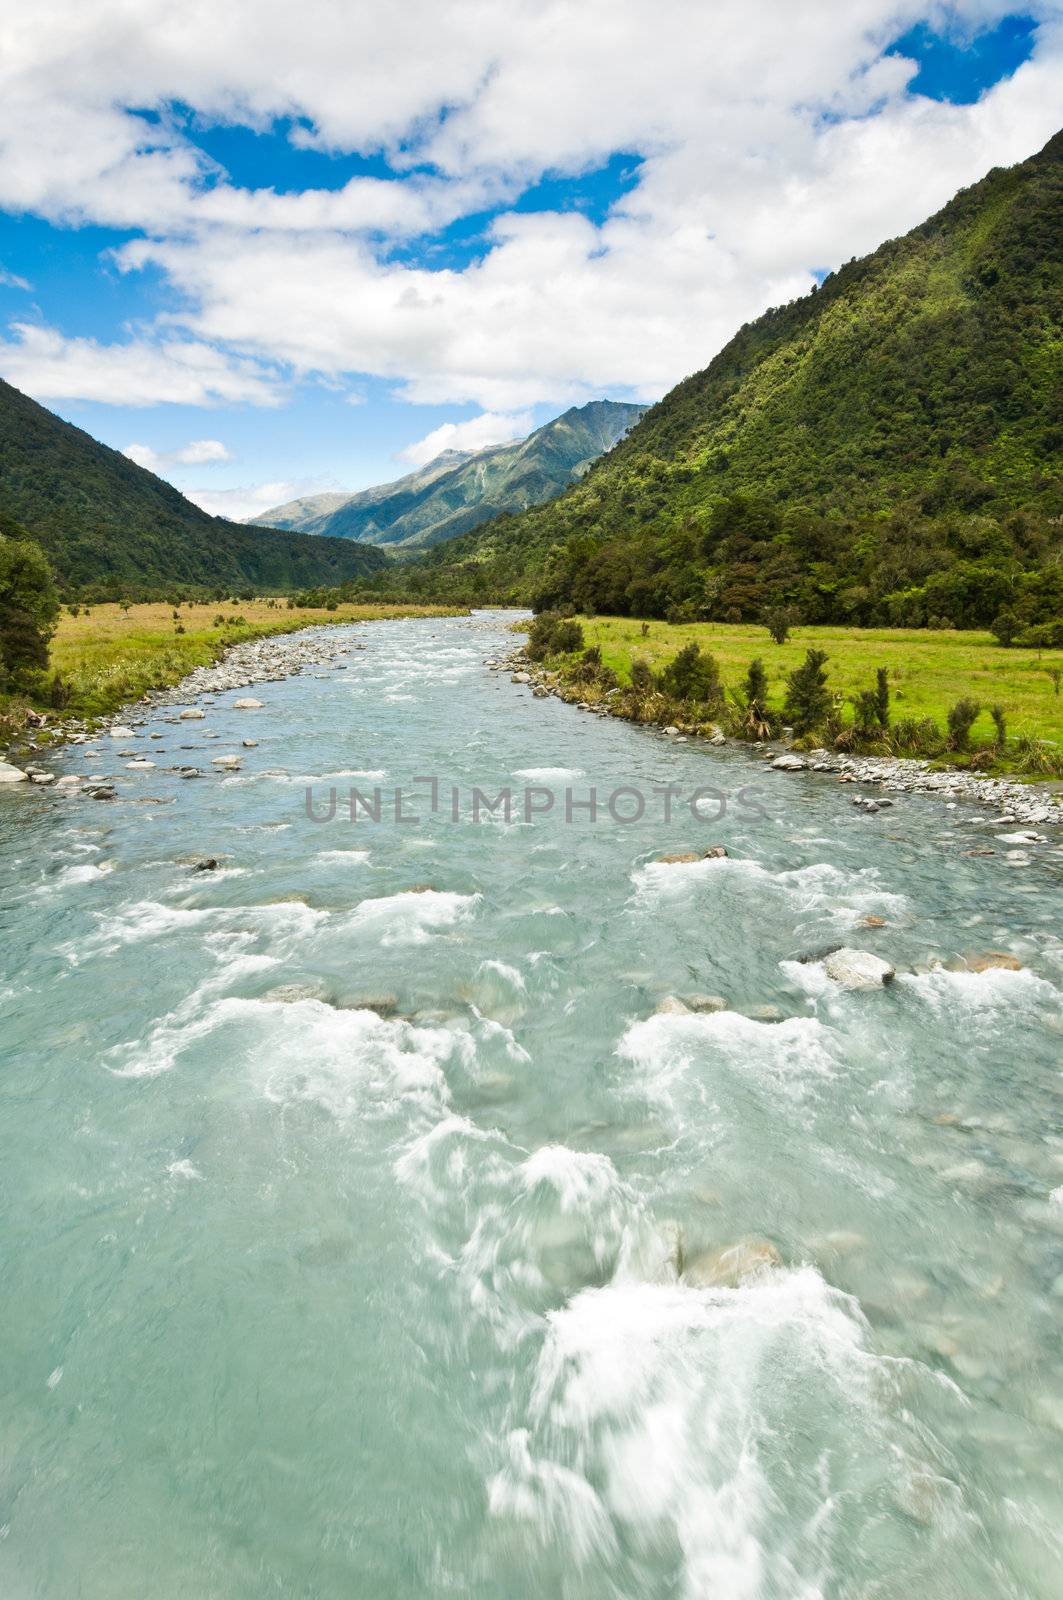 river flowing through a valley with mountain massive in the back ground